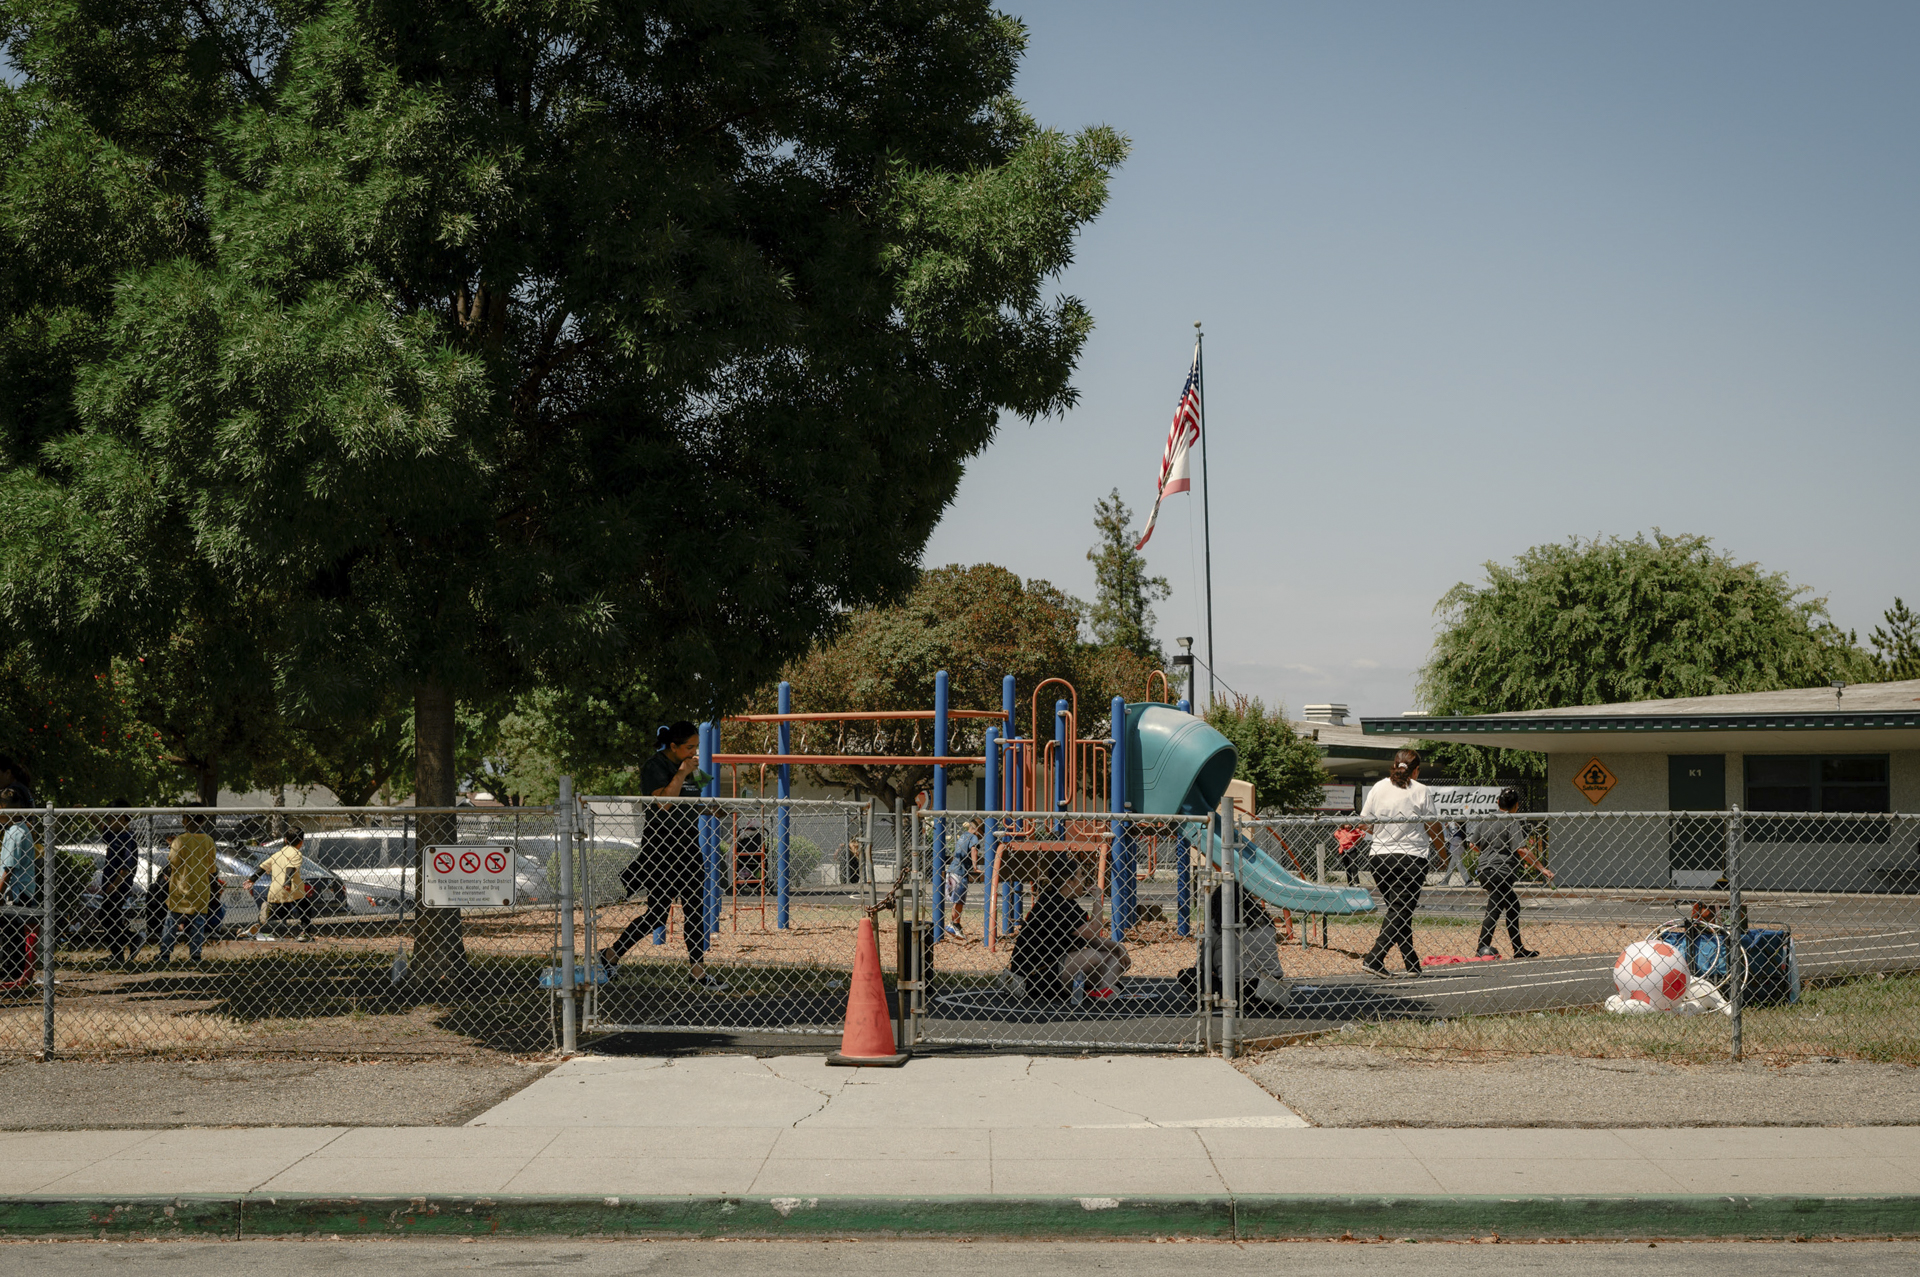 A children and adults circulate beside a playground behind a chainlink fence.